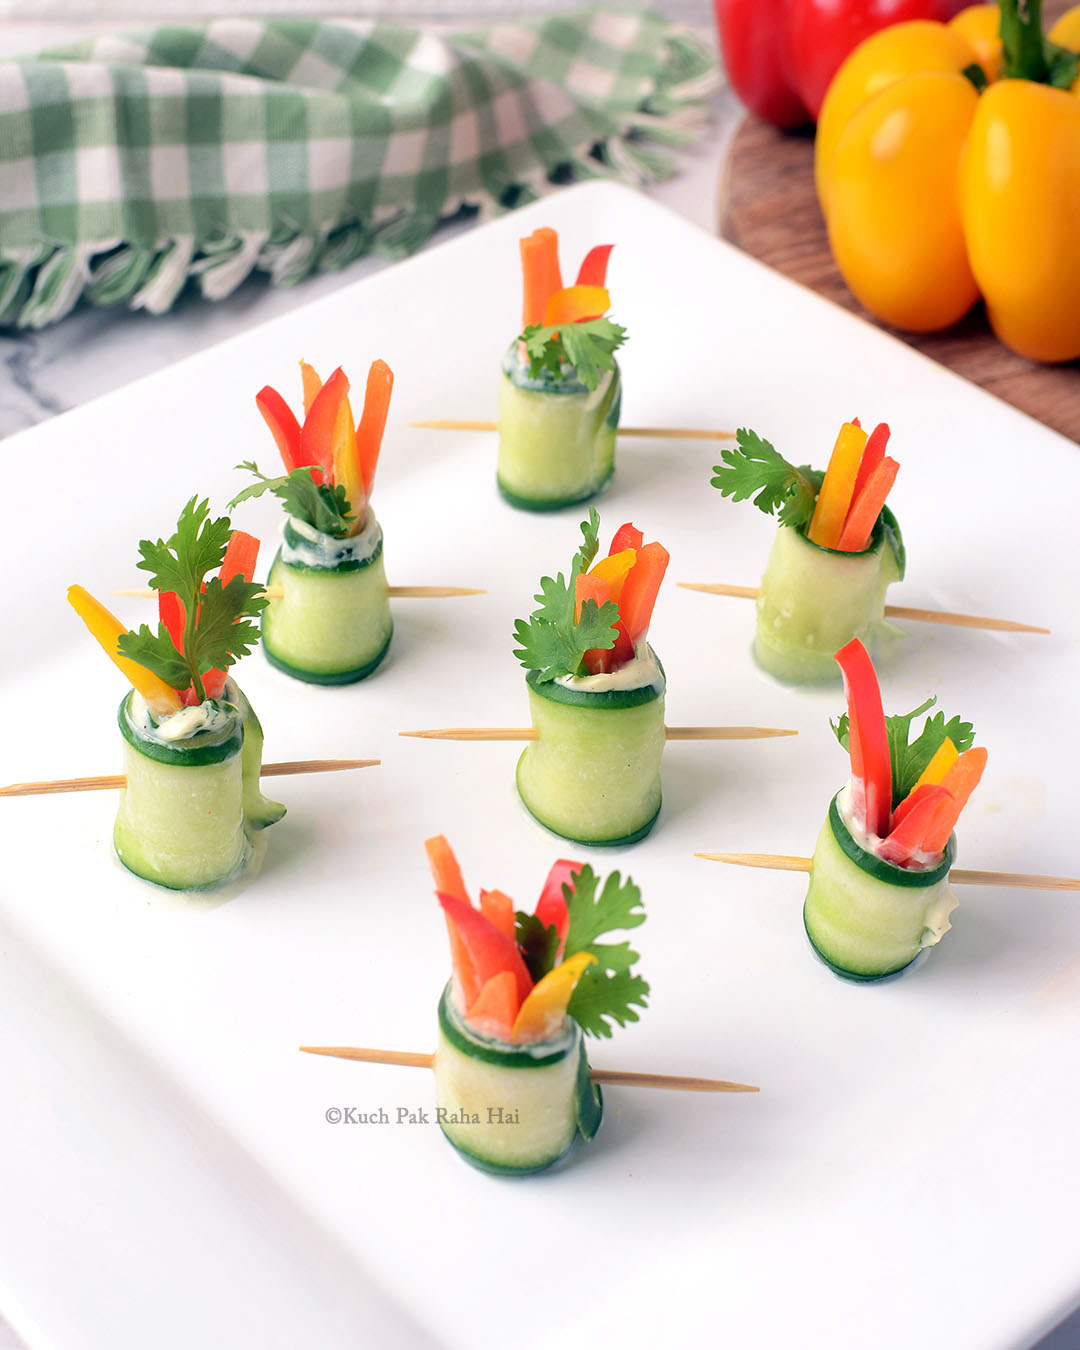 Cucumber rolls with cream cheese carrots bell peppers.